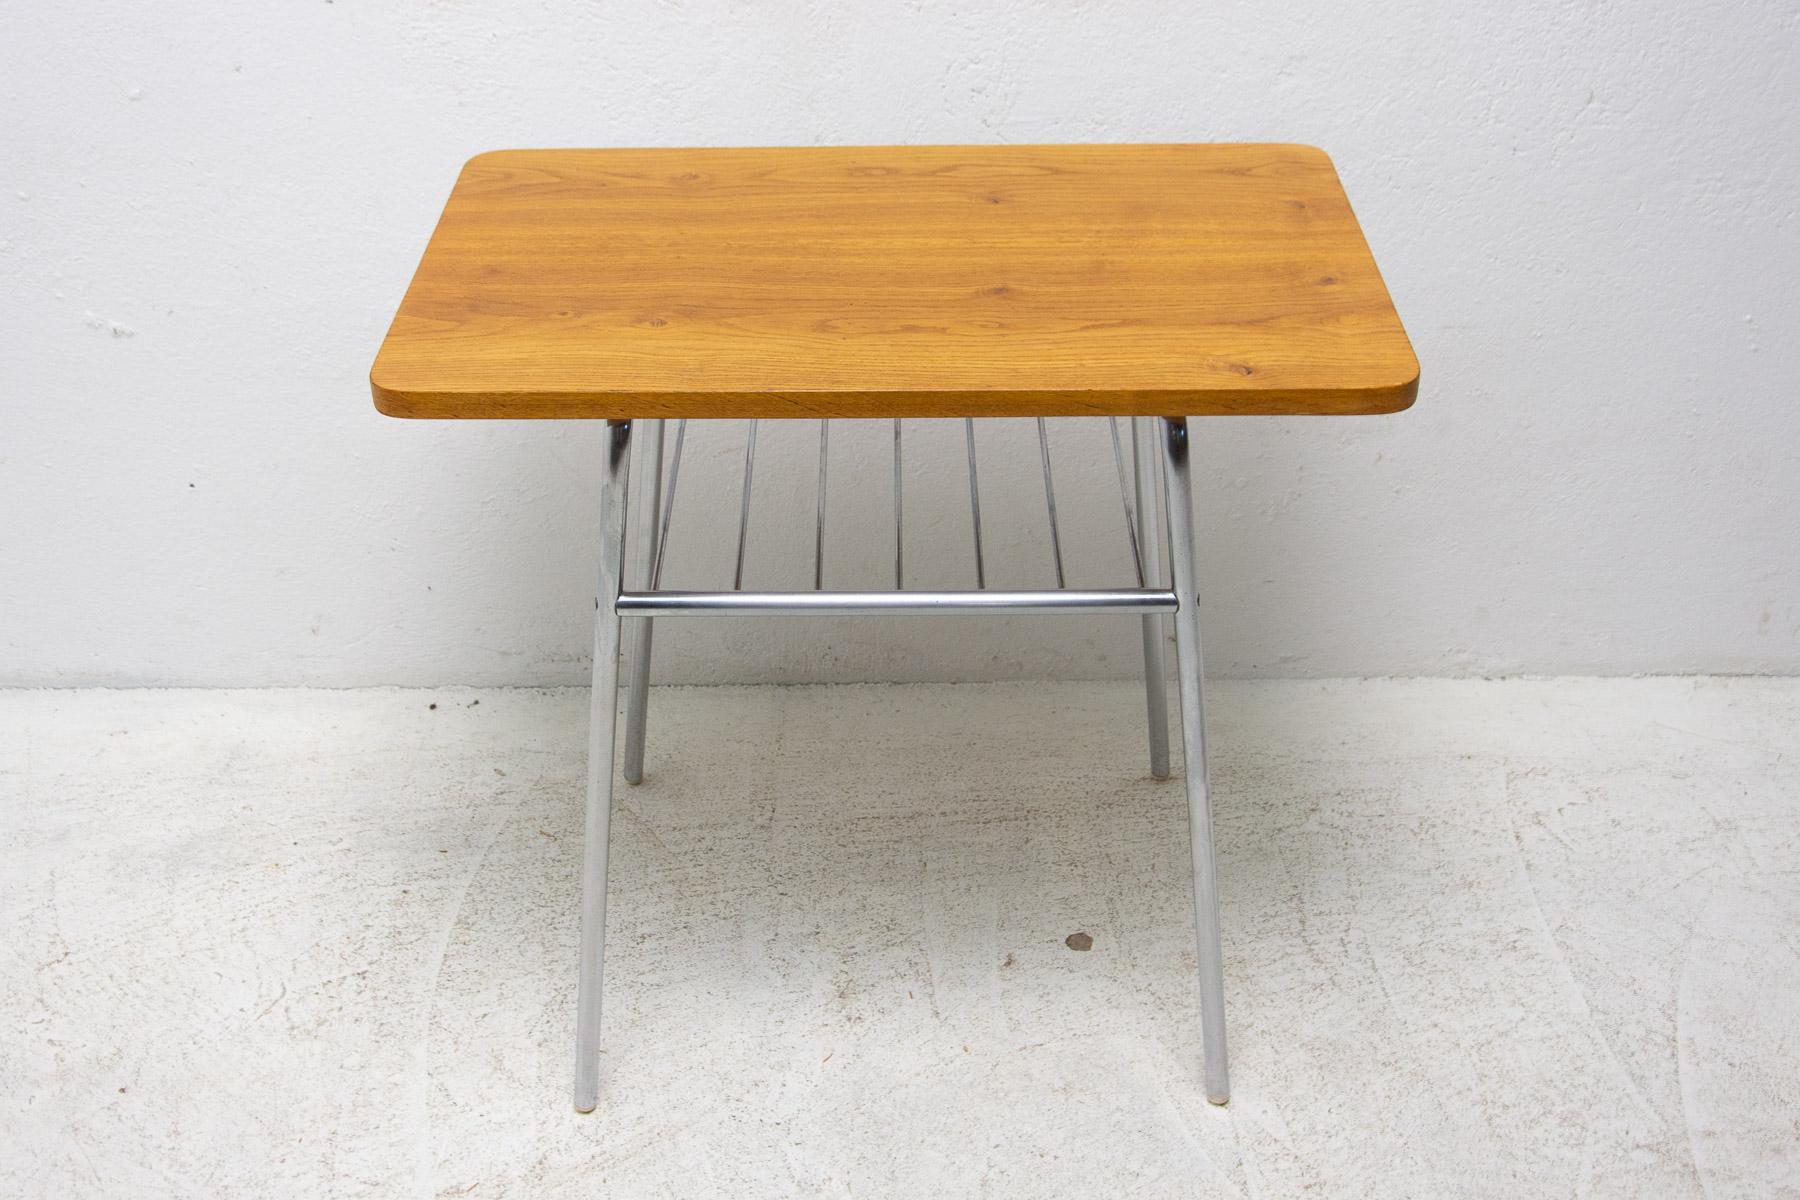 Fully Renovated Chrome and Wood Side Table, 1950s, Czechoslovakia For Sale 6